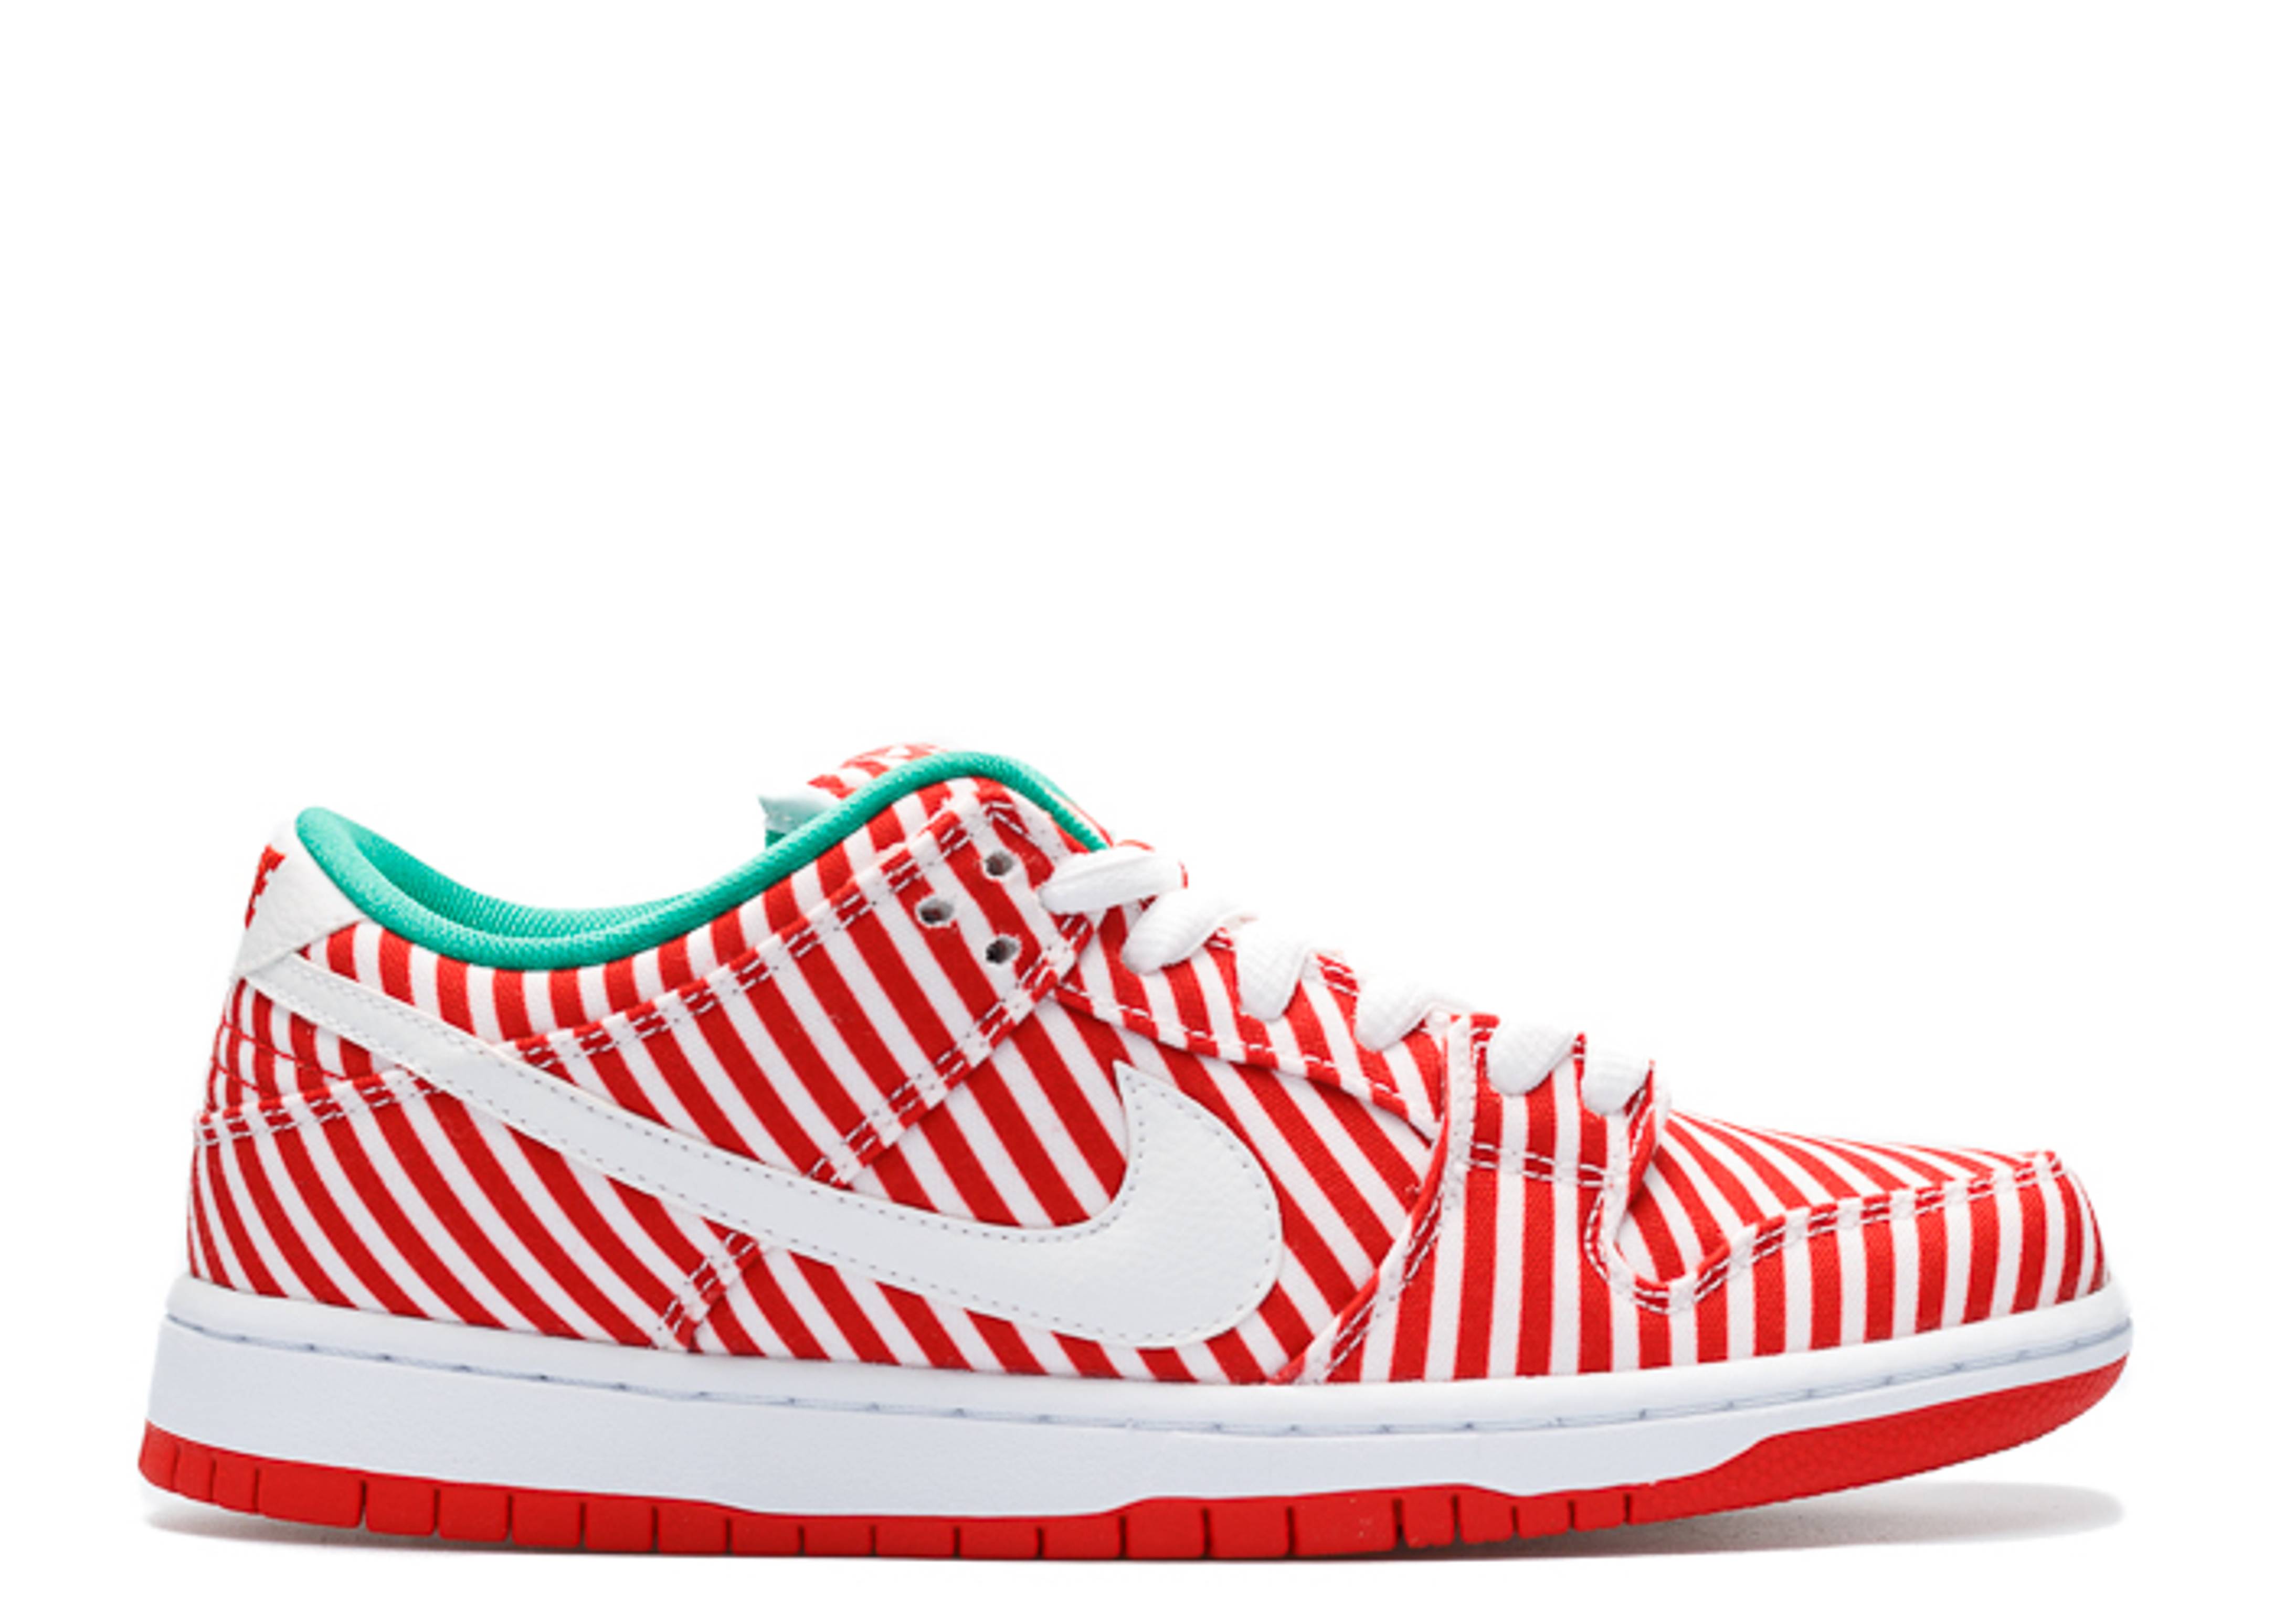 SB Dunk Low 'Candy Cane'